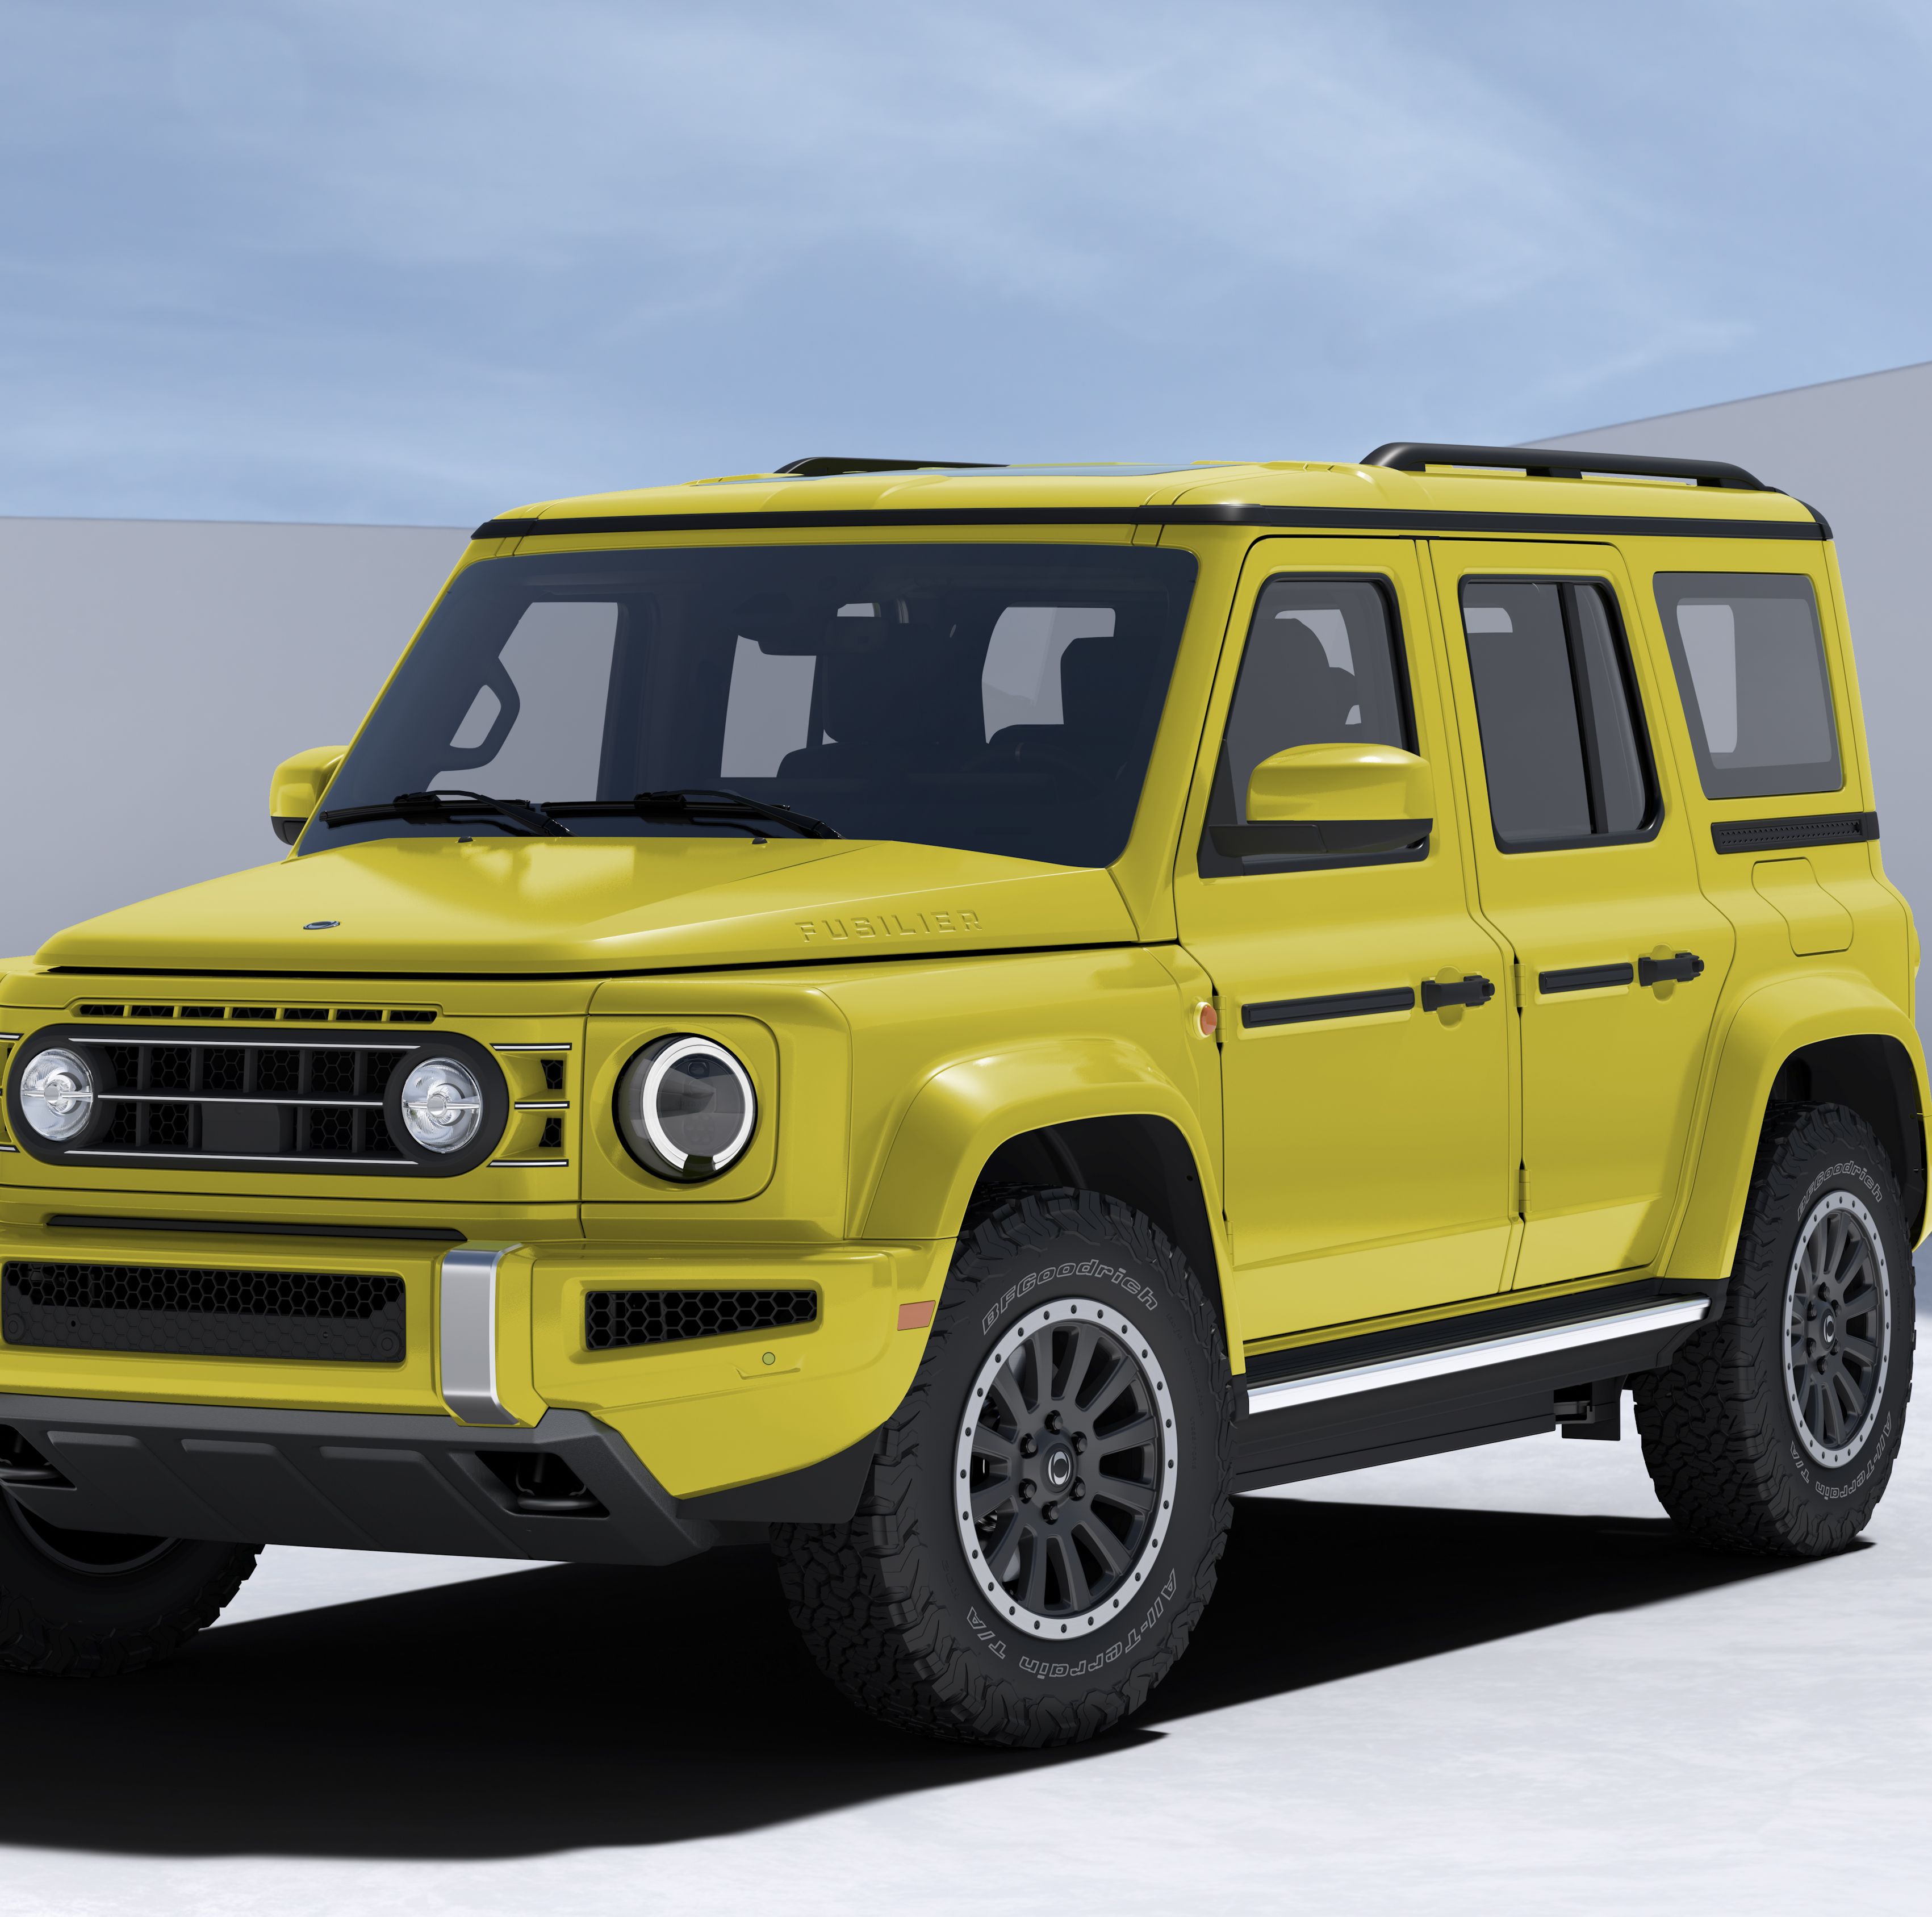 Ineos' Fusilier Will Be a Battery-Electric Off-Road SUV